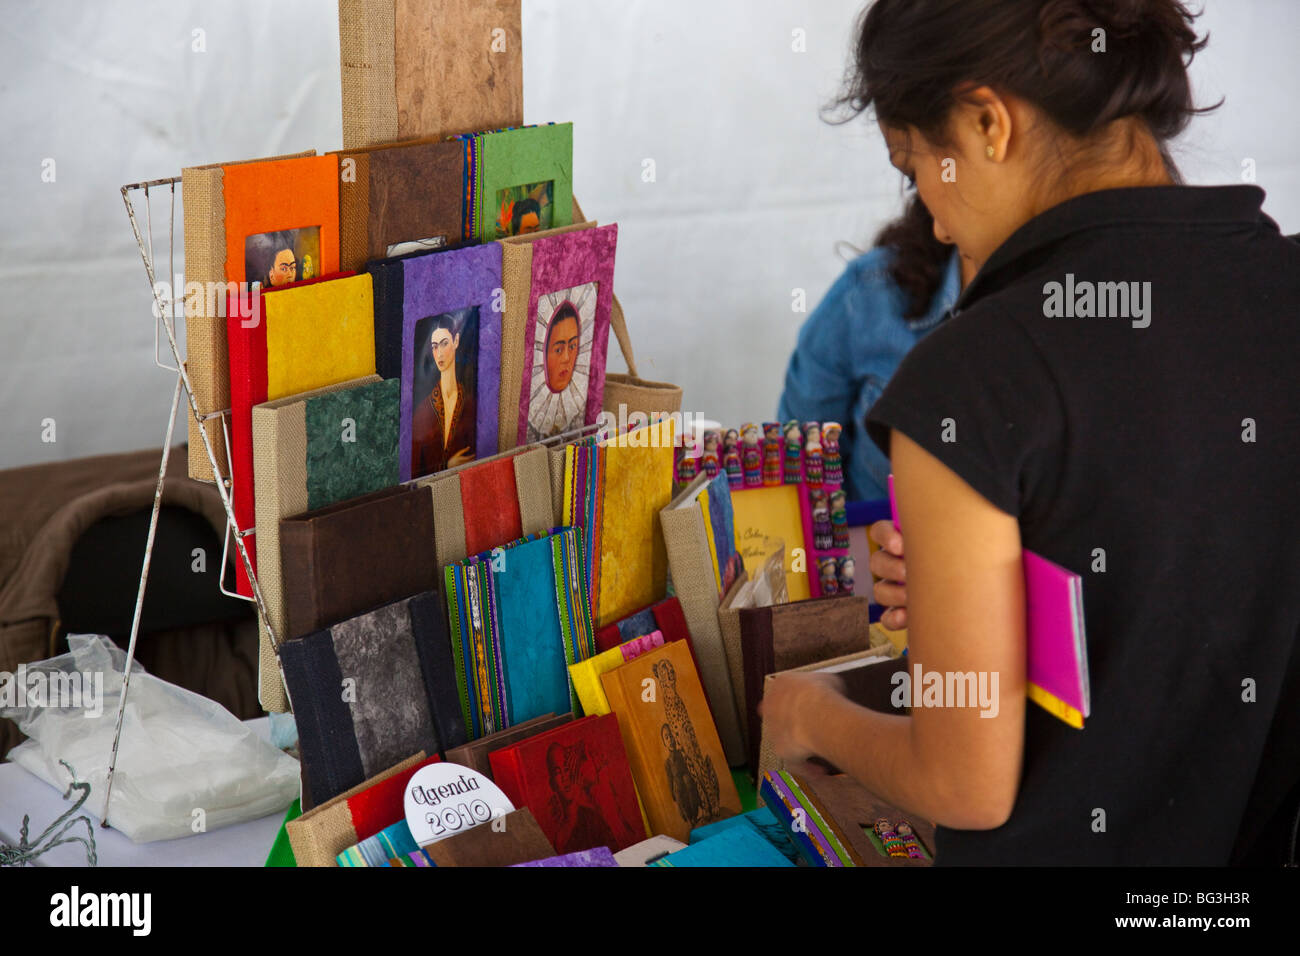 Crafts for sale in Mexico City Stock Photo